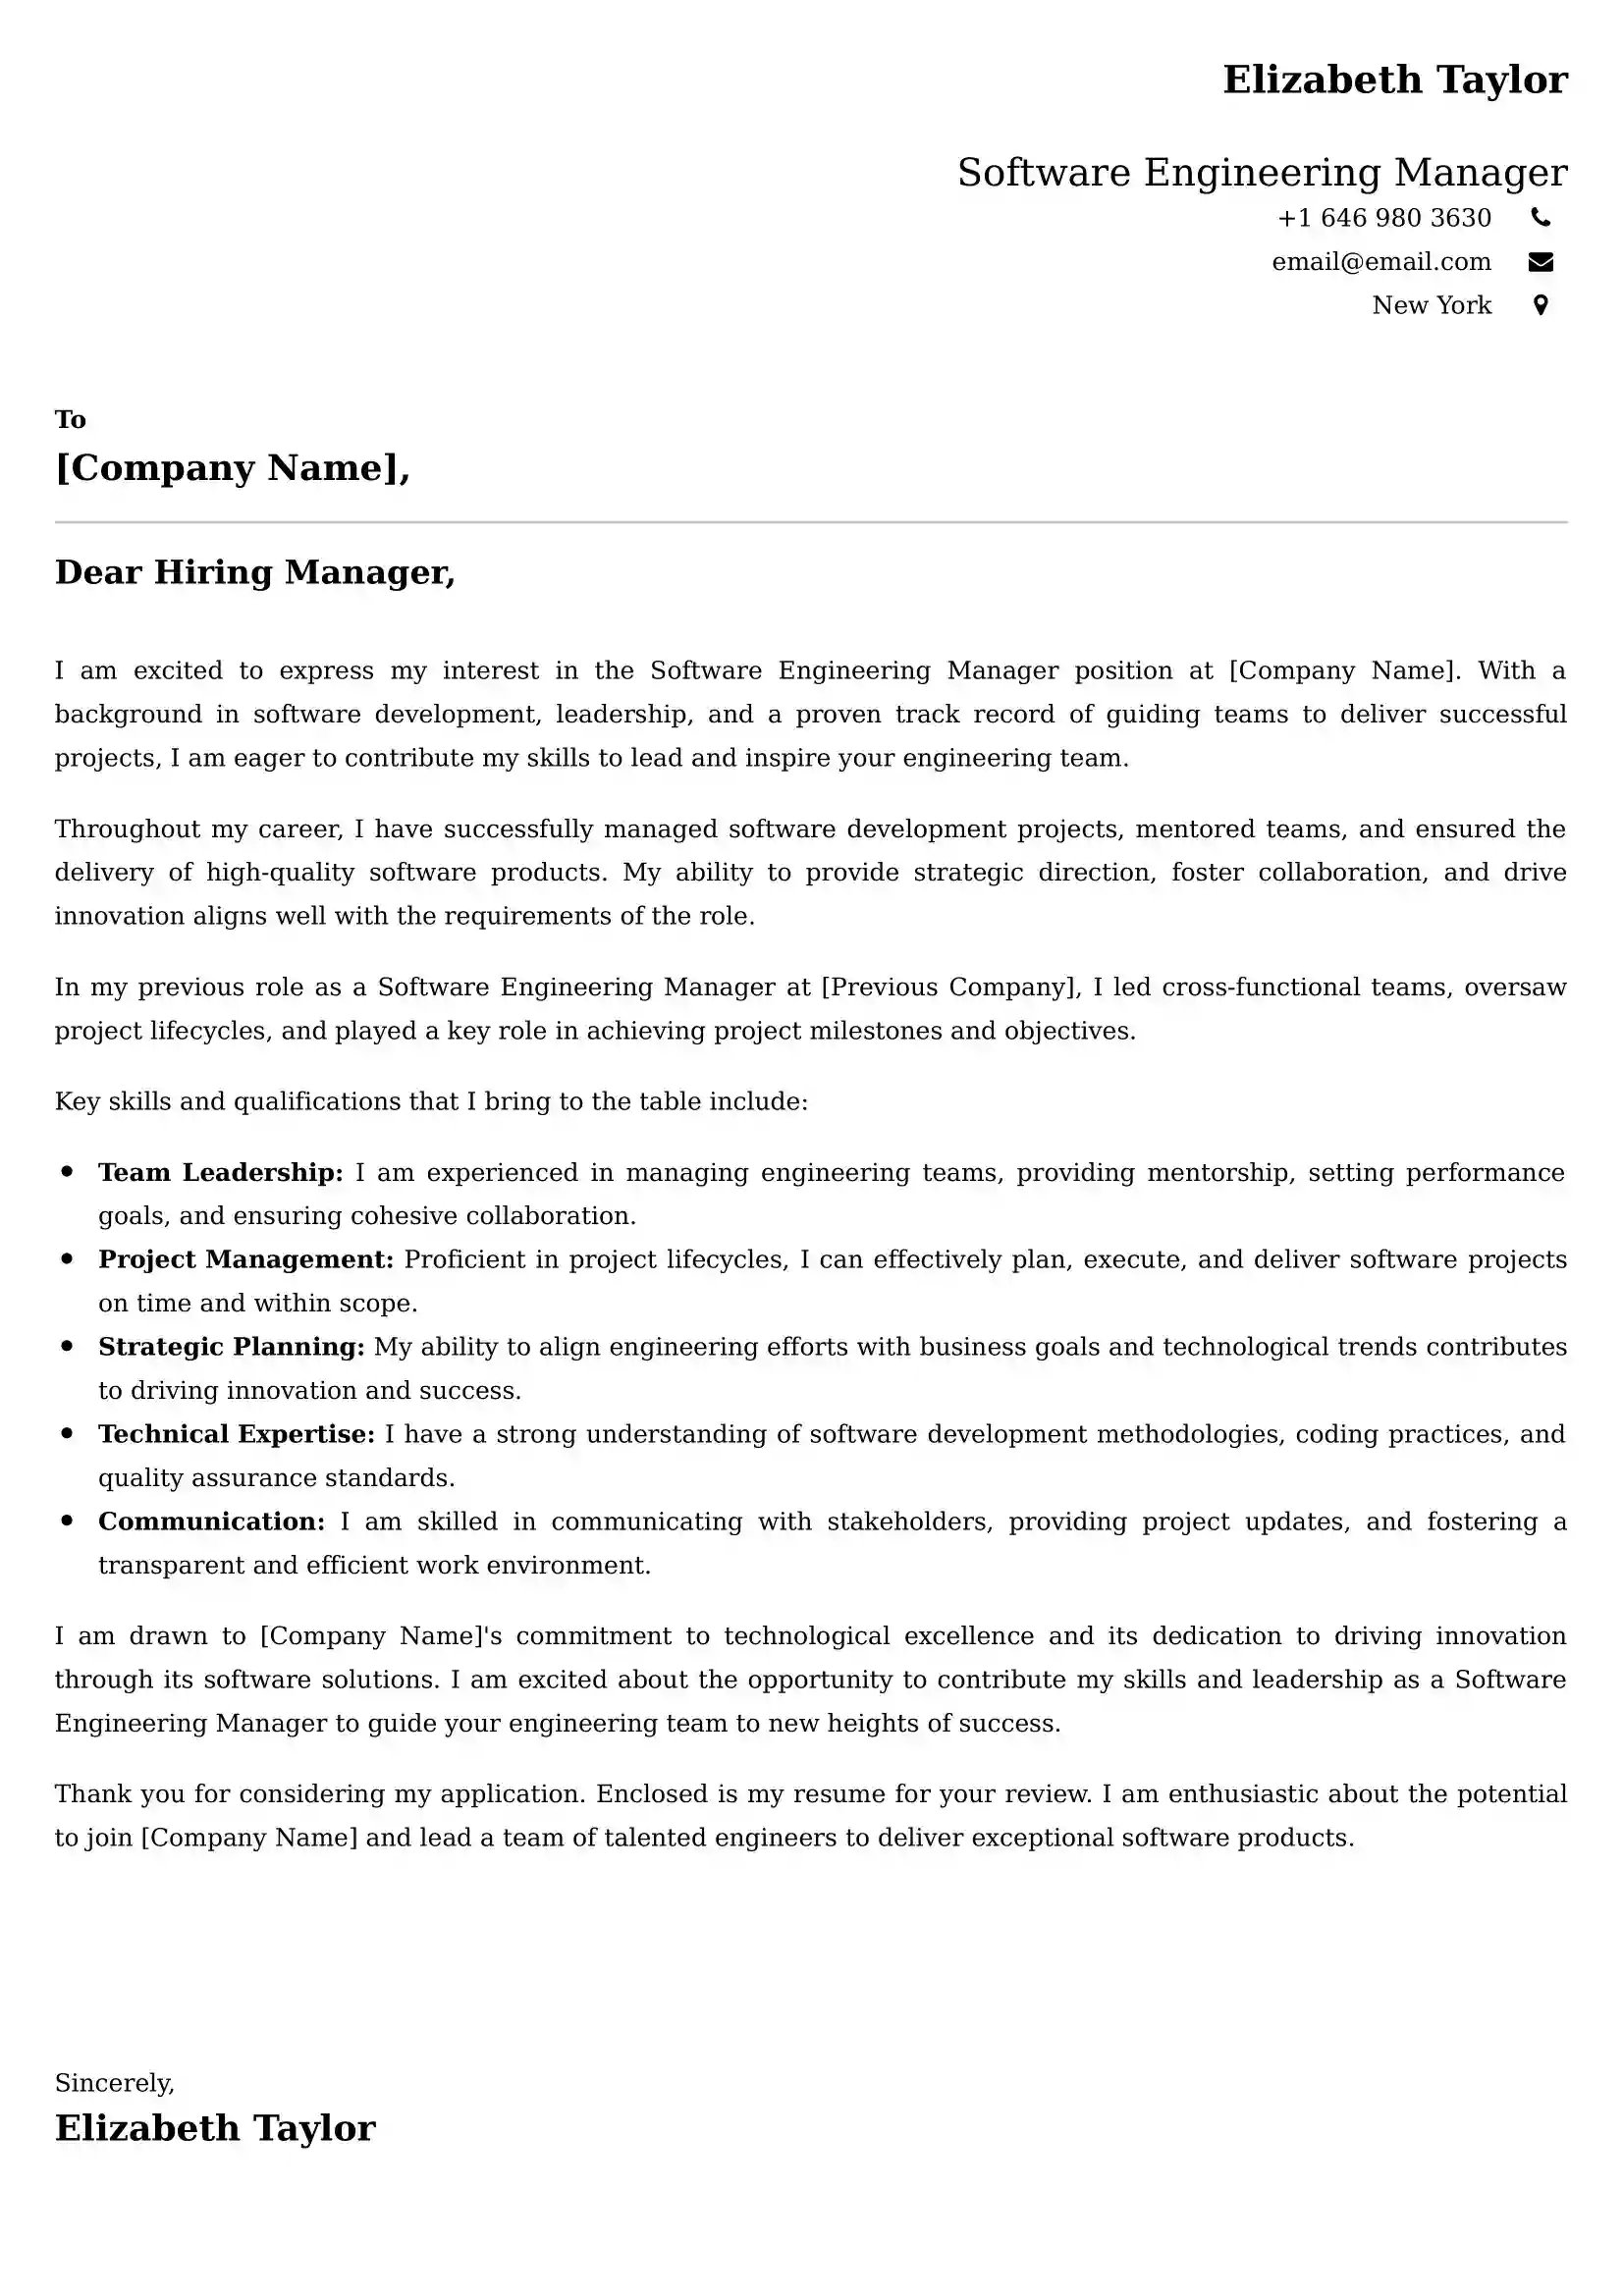 Software Engineering Manager Cover Letter Examples Australia